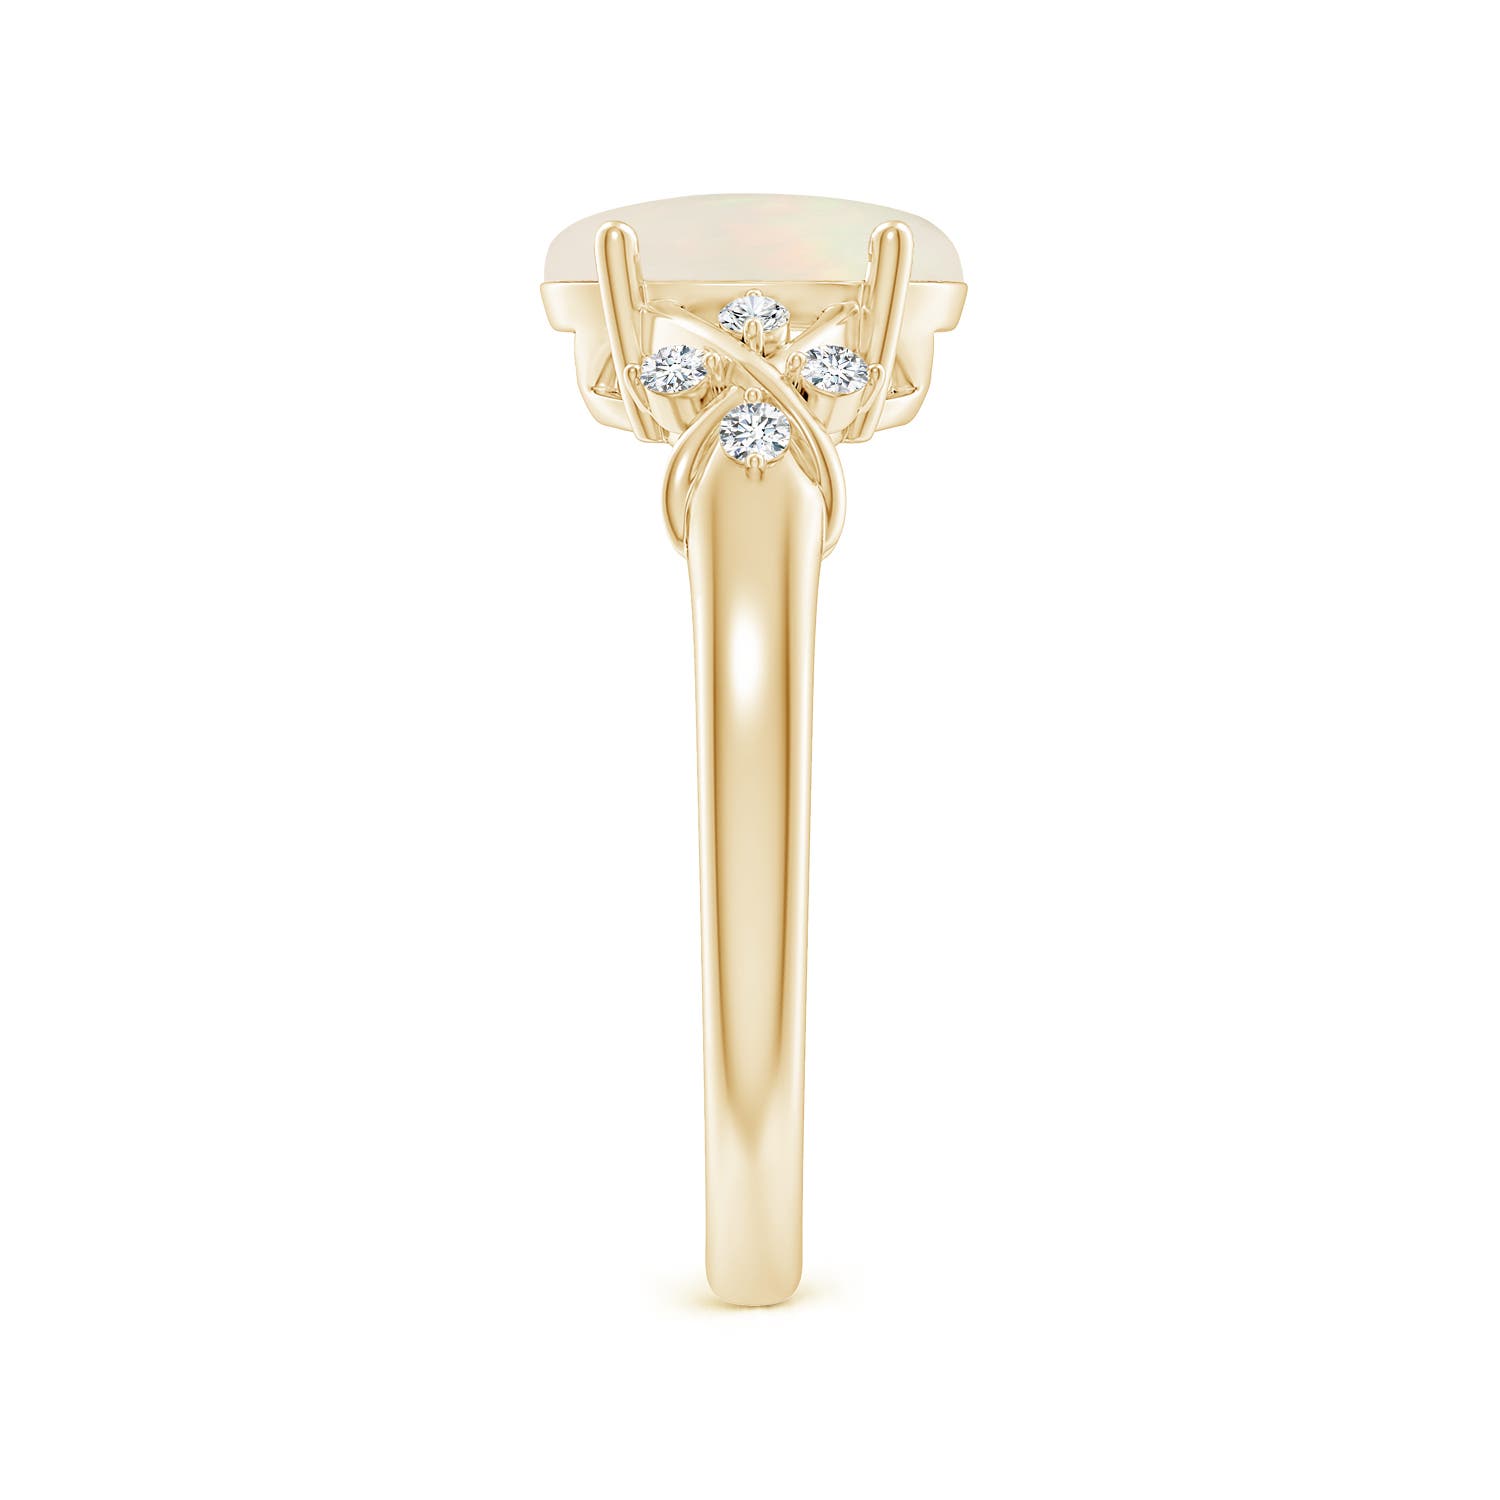 A - Opal / 1.21 CT / 14 KT Yellow Gold